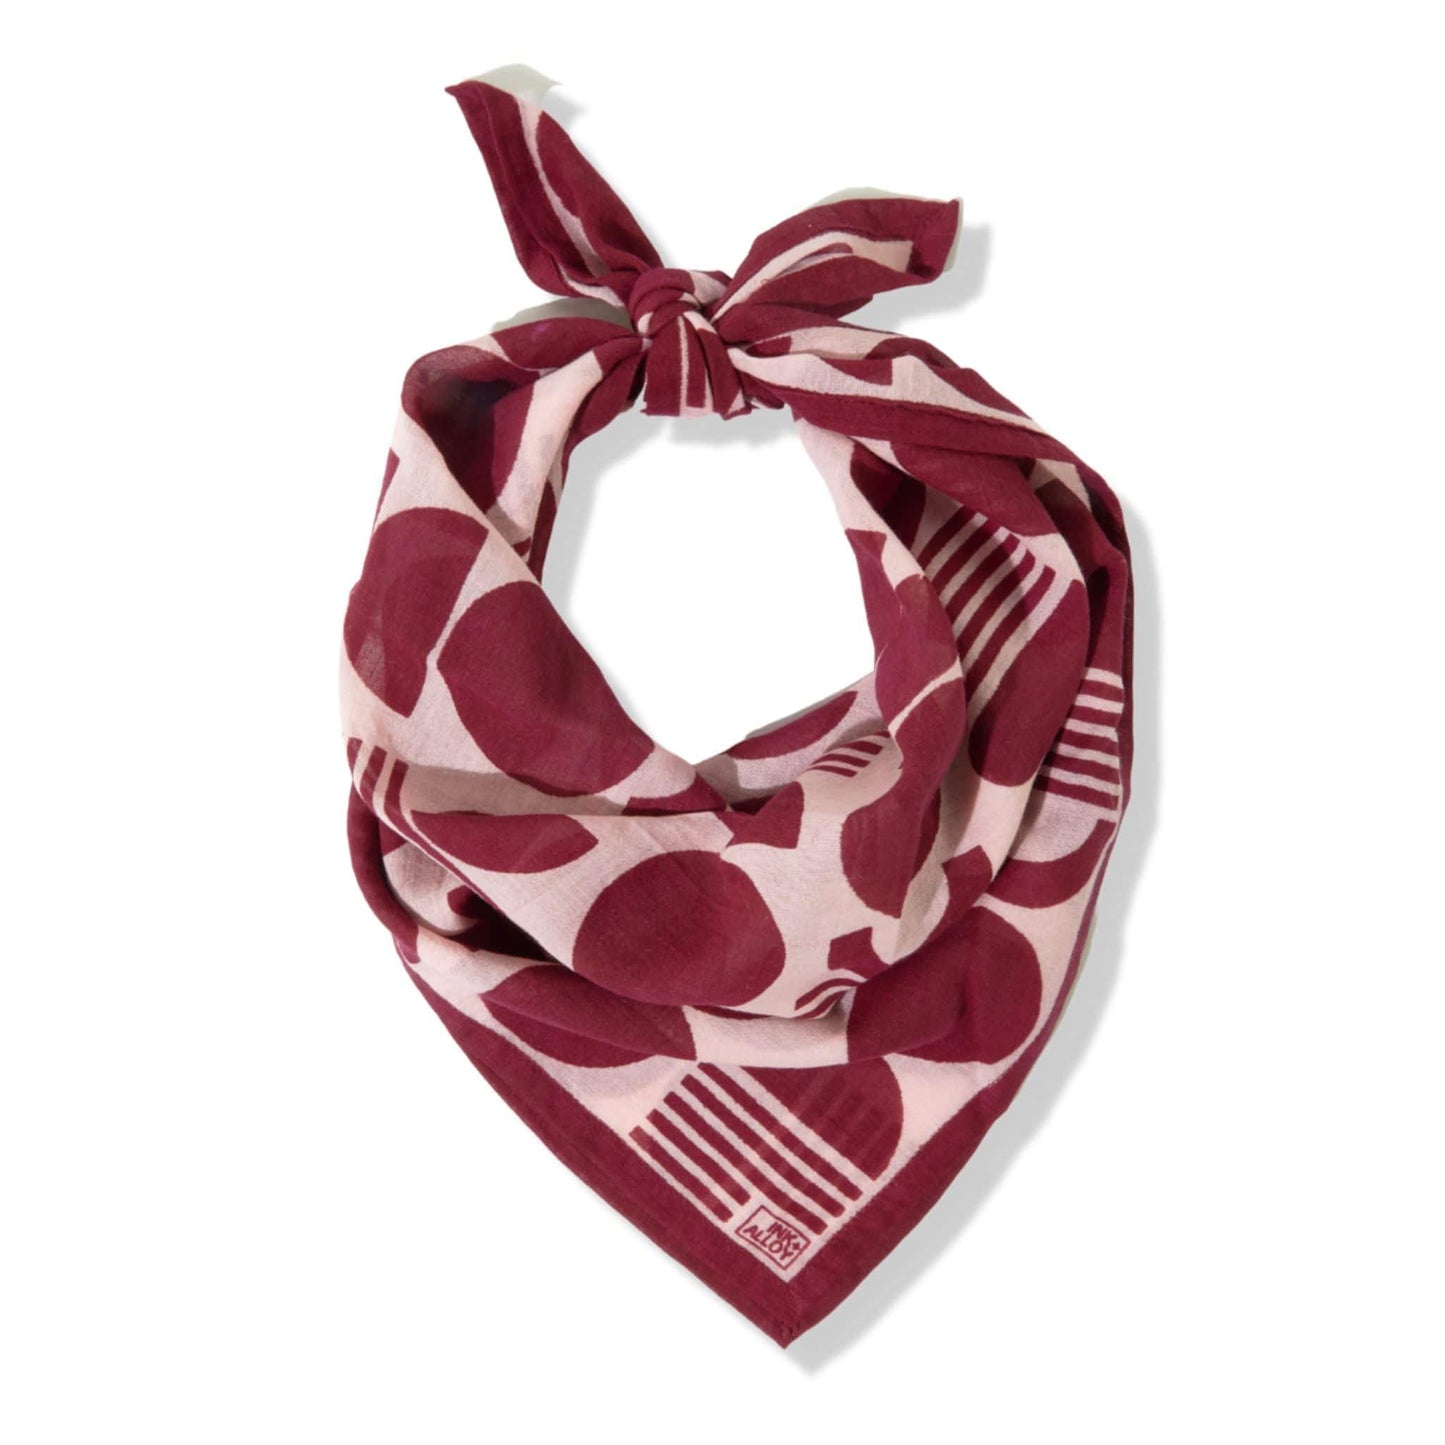 Port and Blush Cotton Voile Scarf Scarves